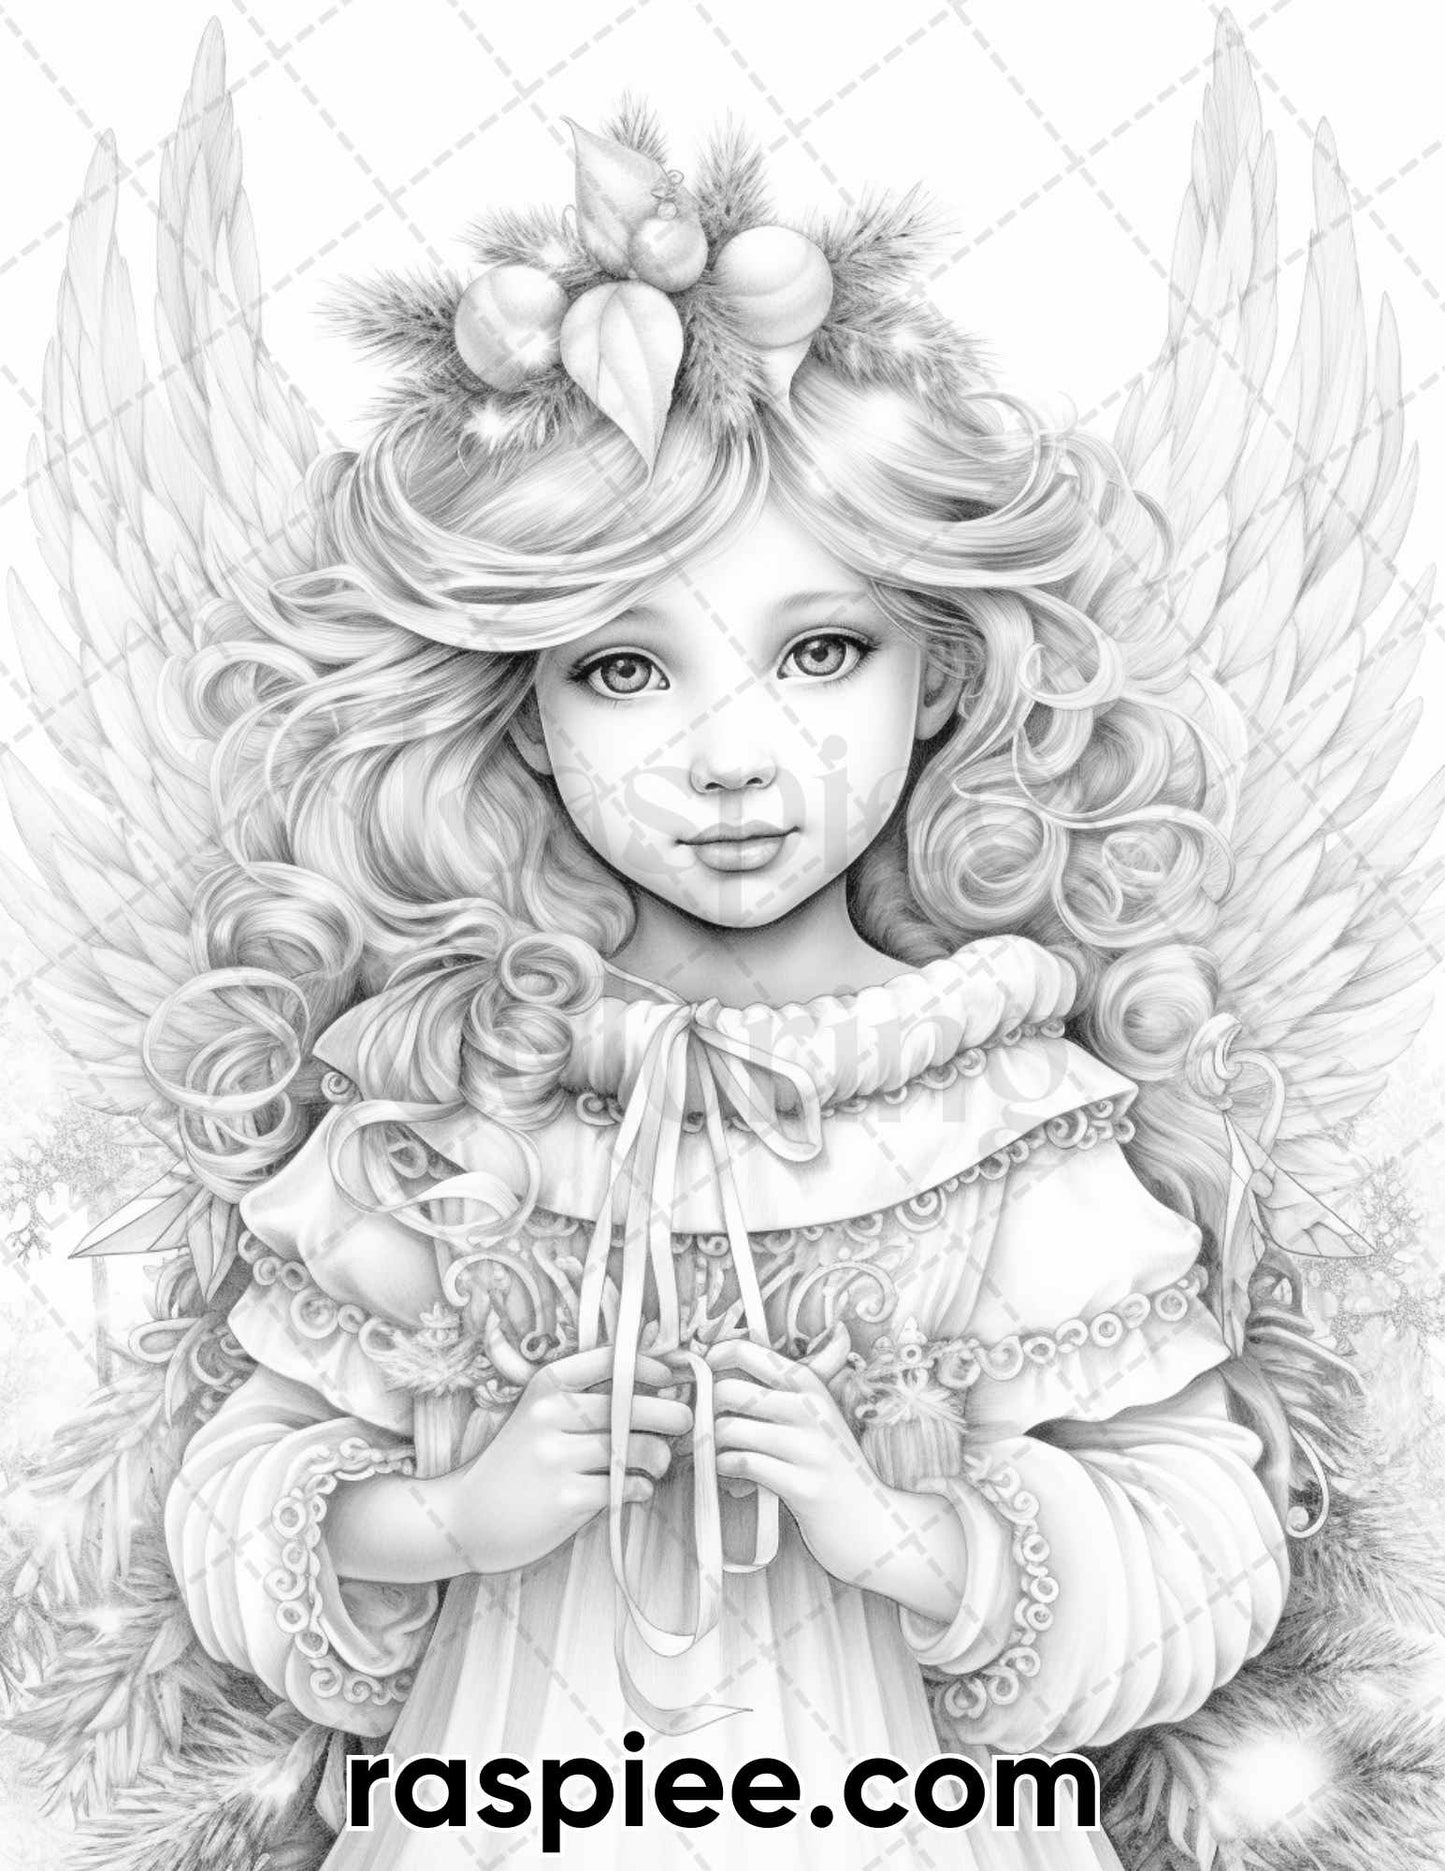 Christmas Angel Coloring Page, Adult Coloring Activity, Mindful Coloring Activity, Christmas Coloring Book Printable, Grayscale Coloring Pages, Xmas Coloring Pages, Christmas Coloring Sheets, Portrait Coloring Pages, Holiday Coloring Pages, Winter Coloring Pages for Adults, Christmast Coloring Pages for Adults